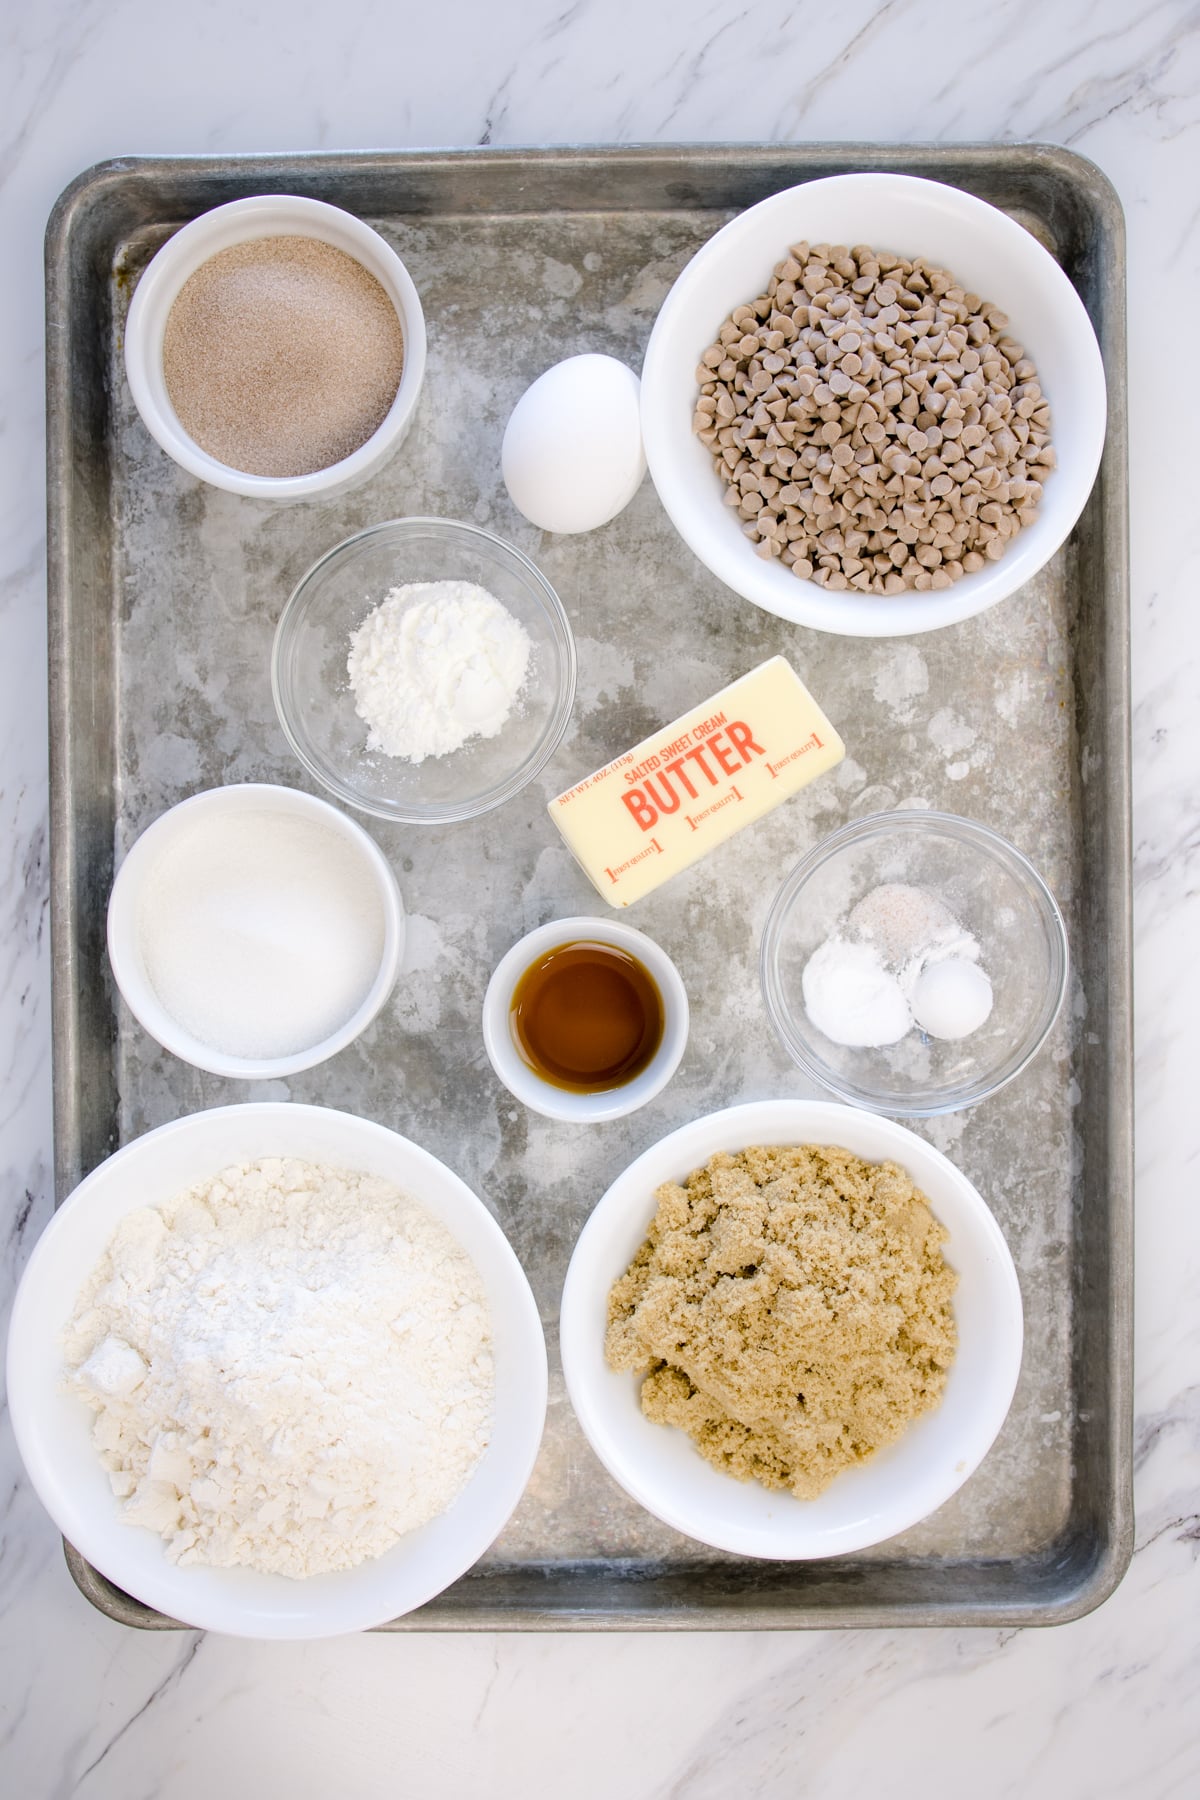 Top view of ingredients needed to make Cinnamon Chip Cookies in small bowls on a baking tray.